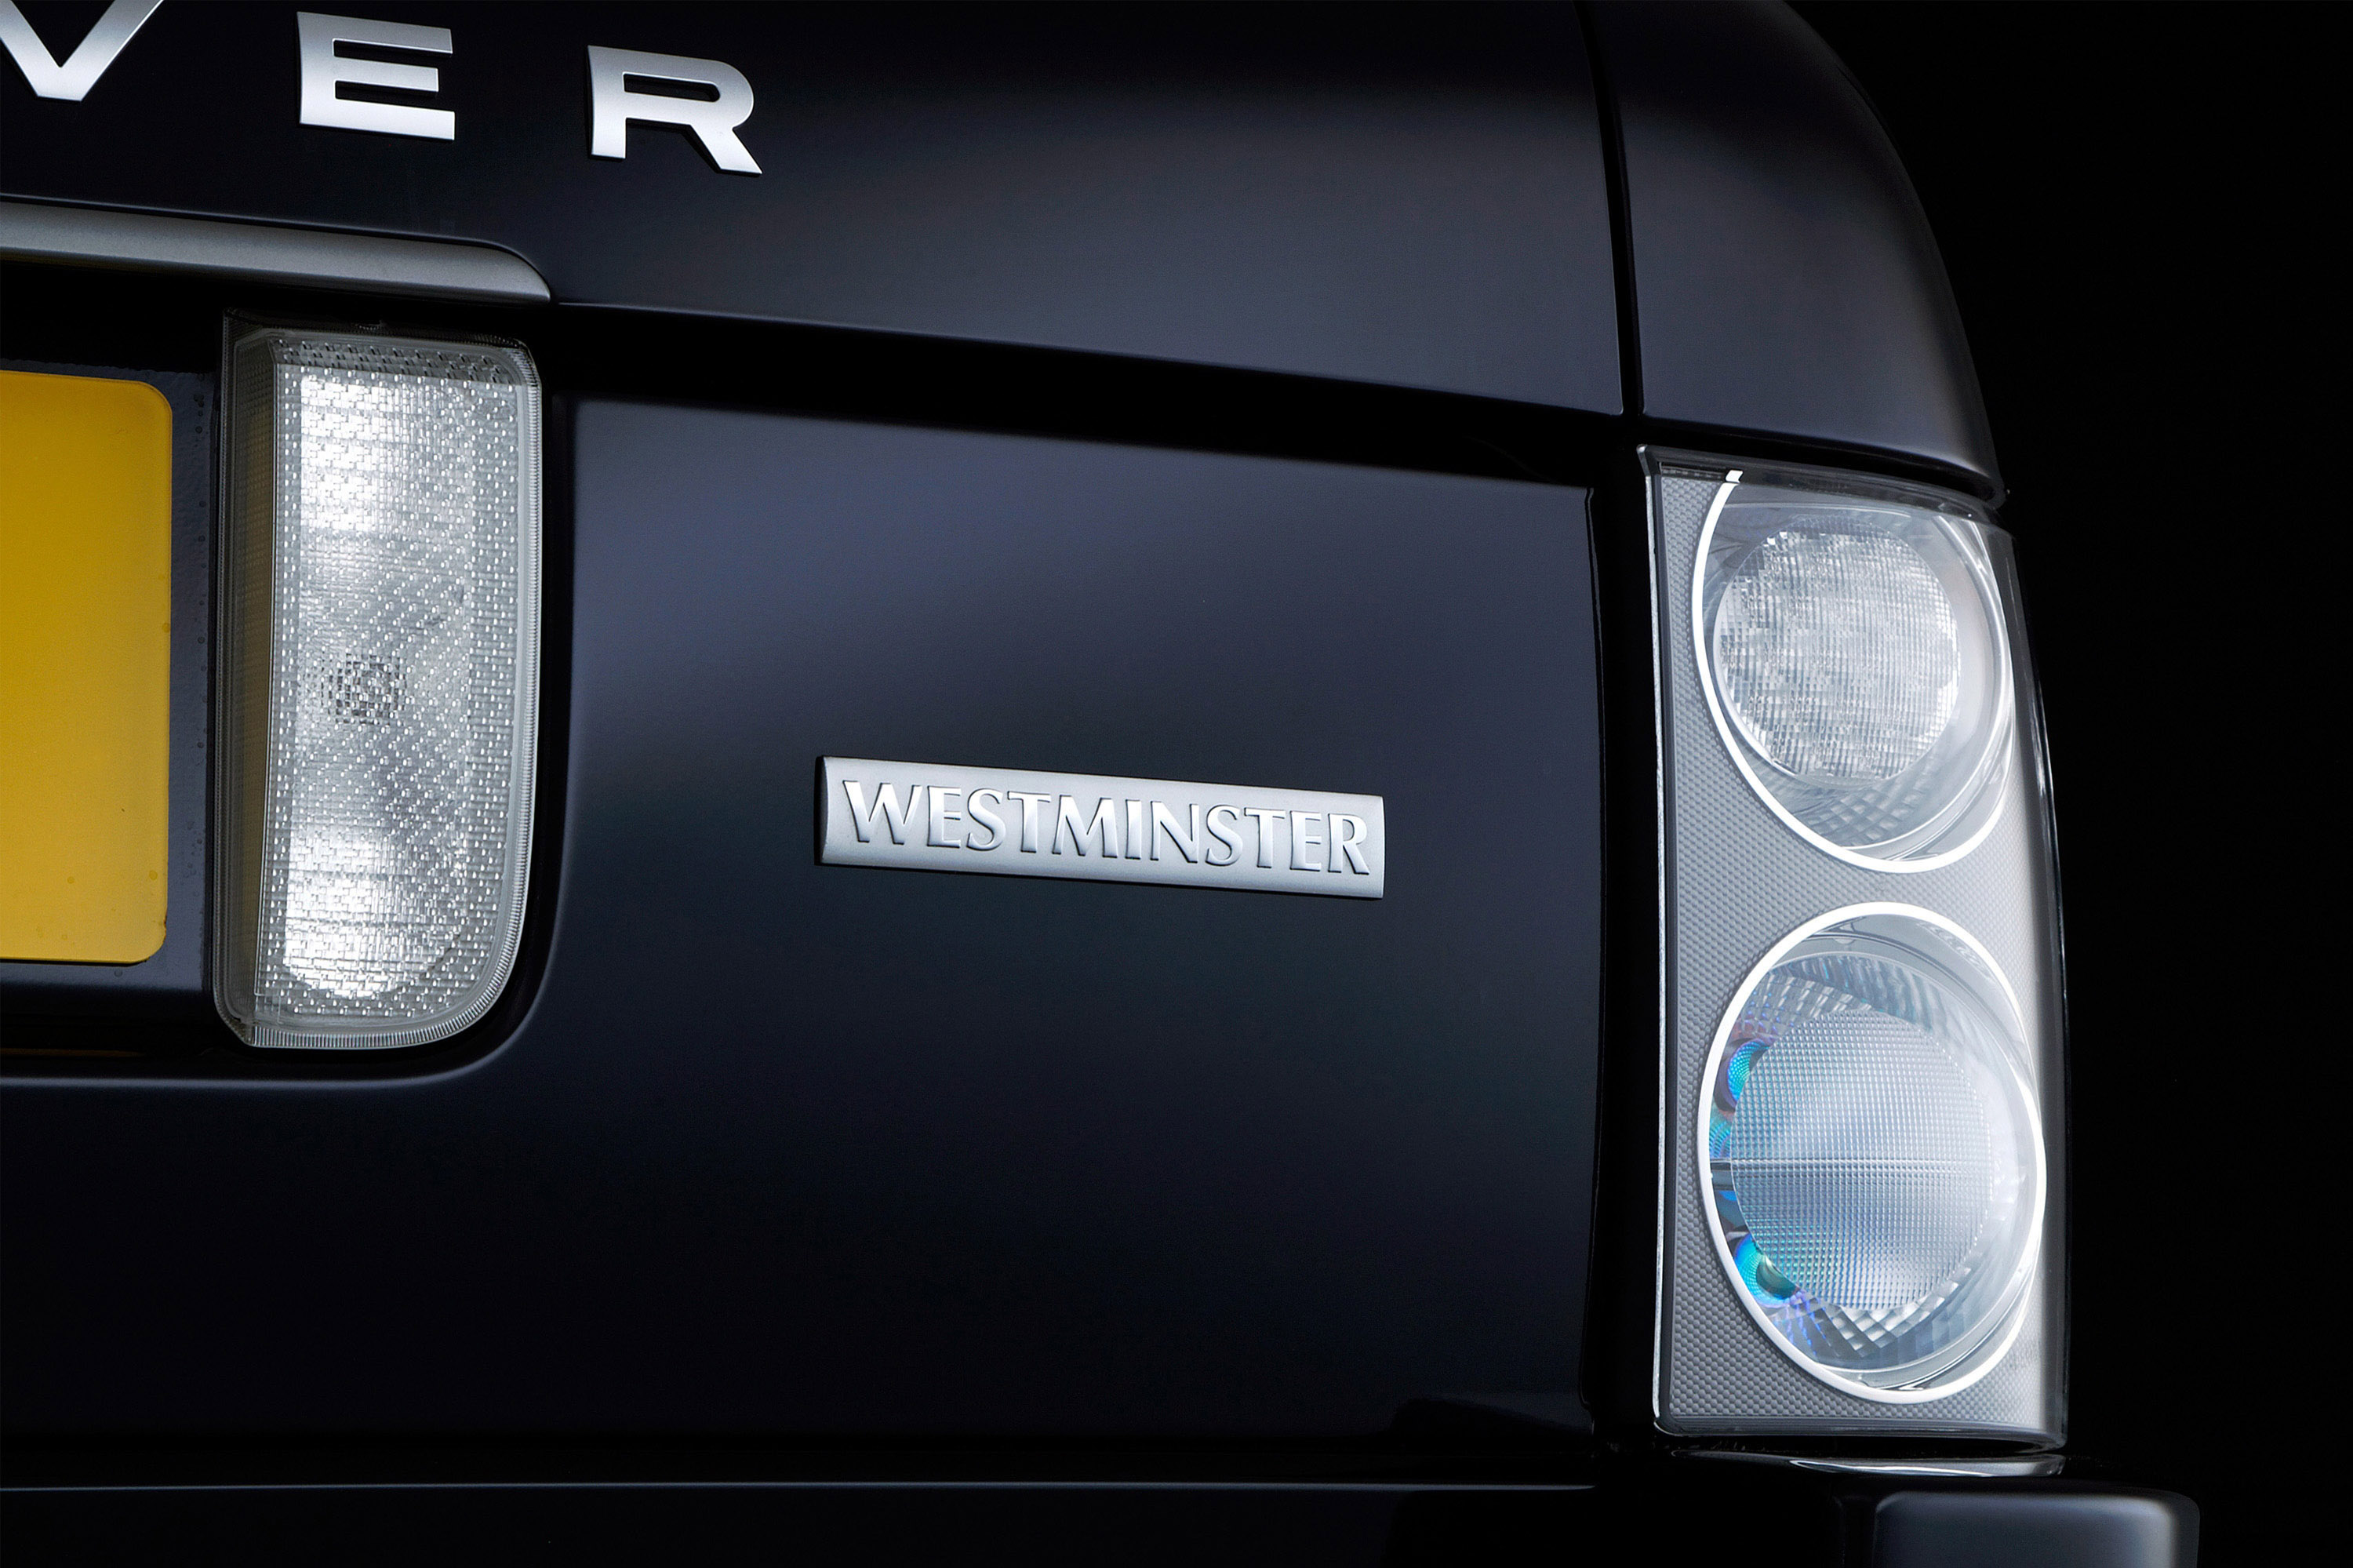 Range Rover Westminster Limited Edition